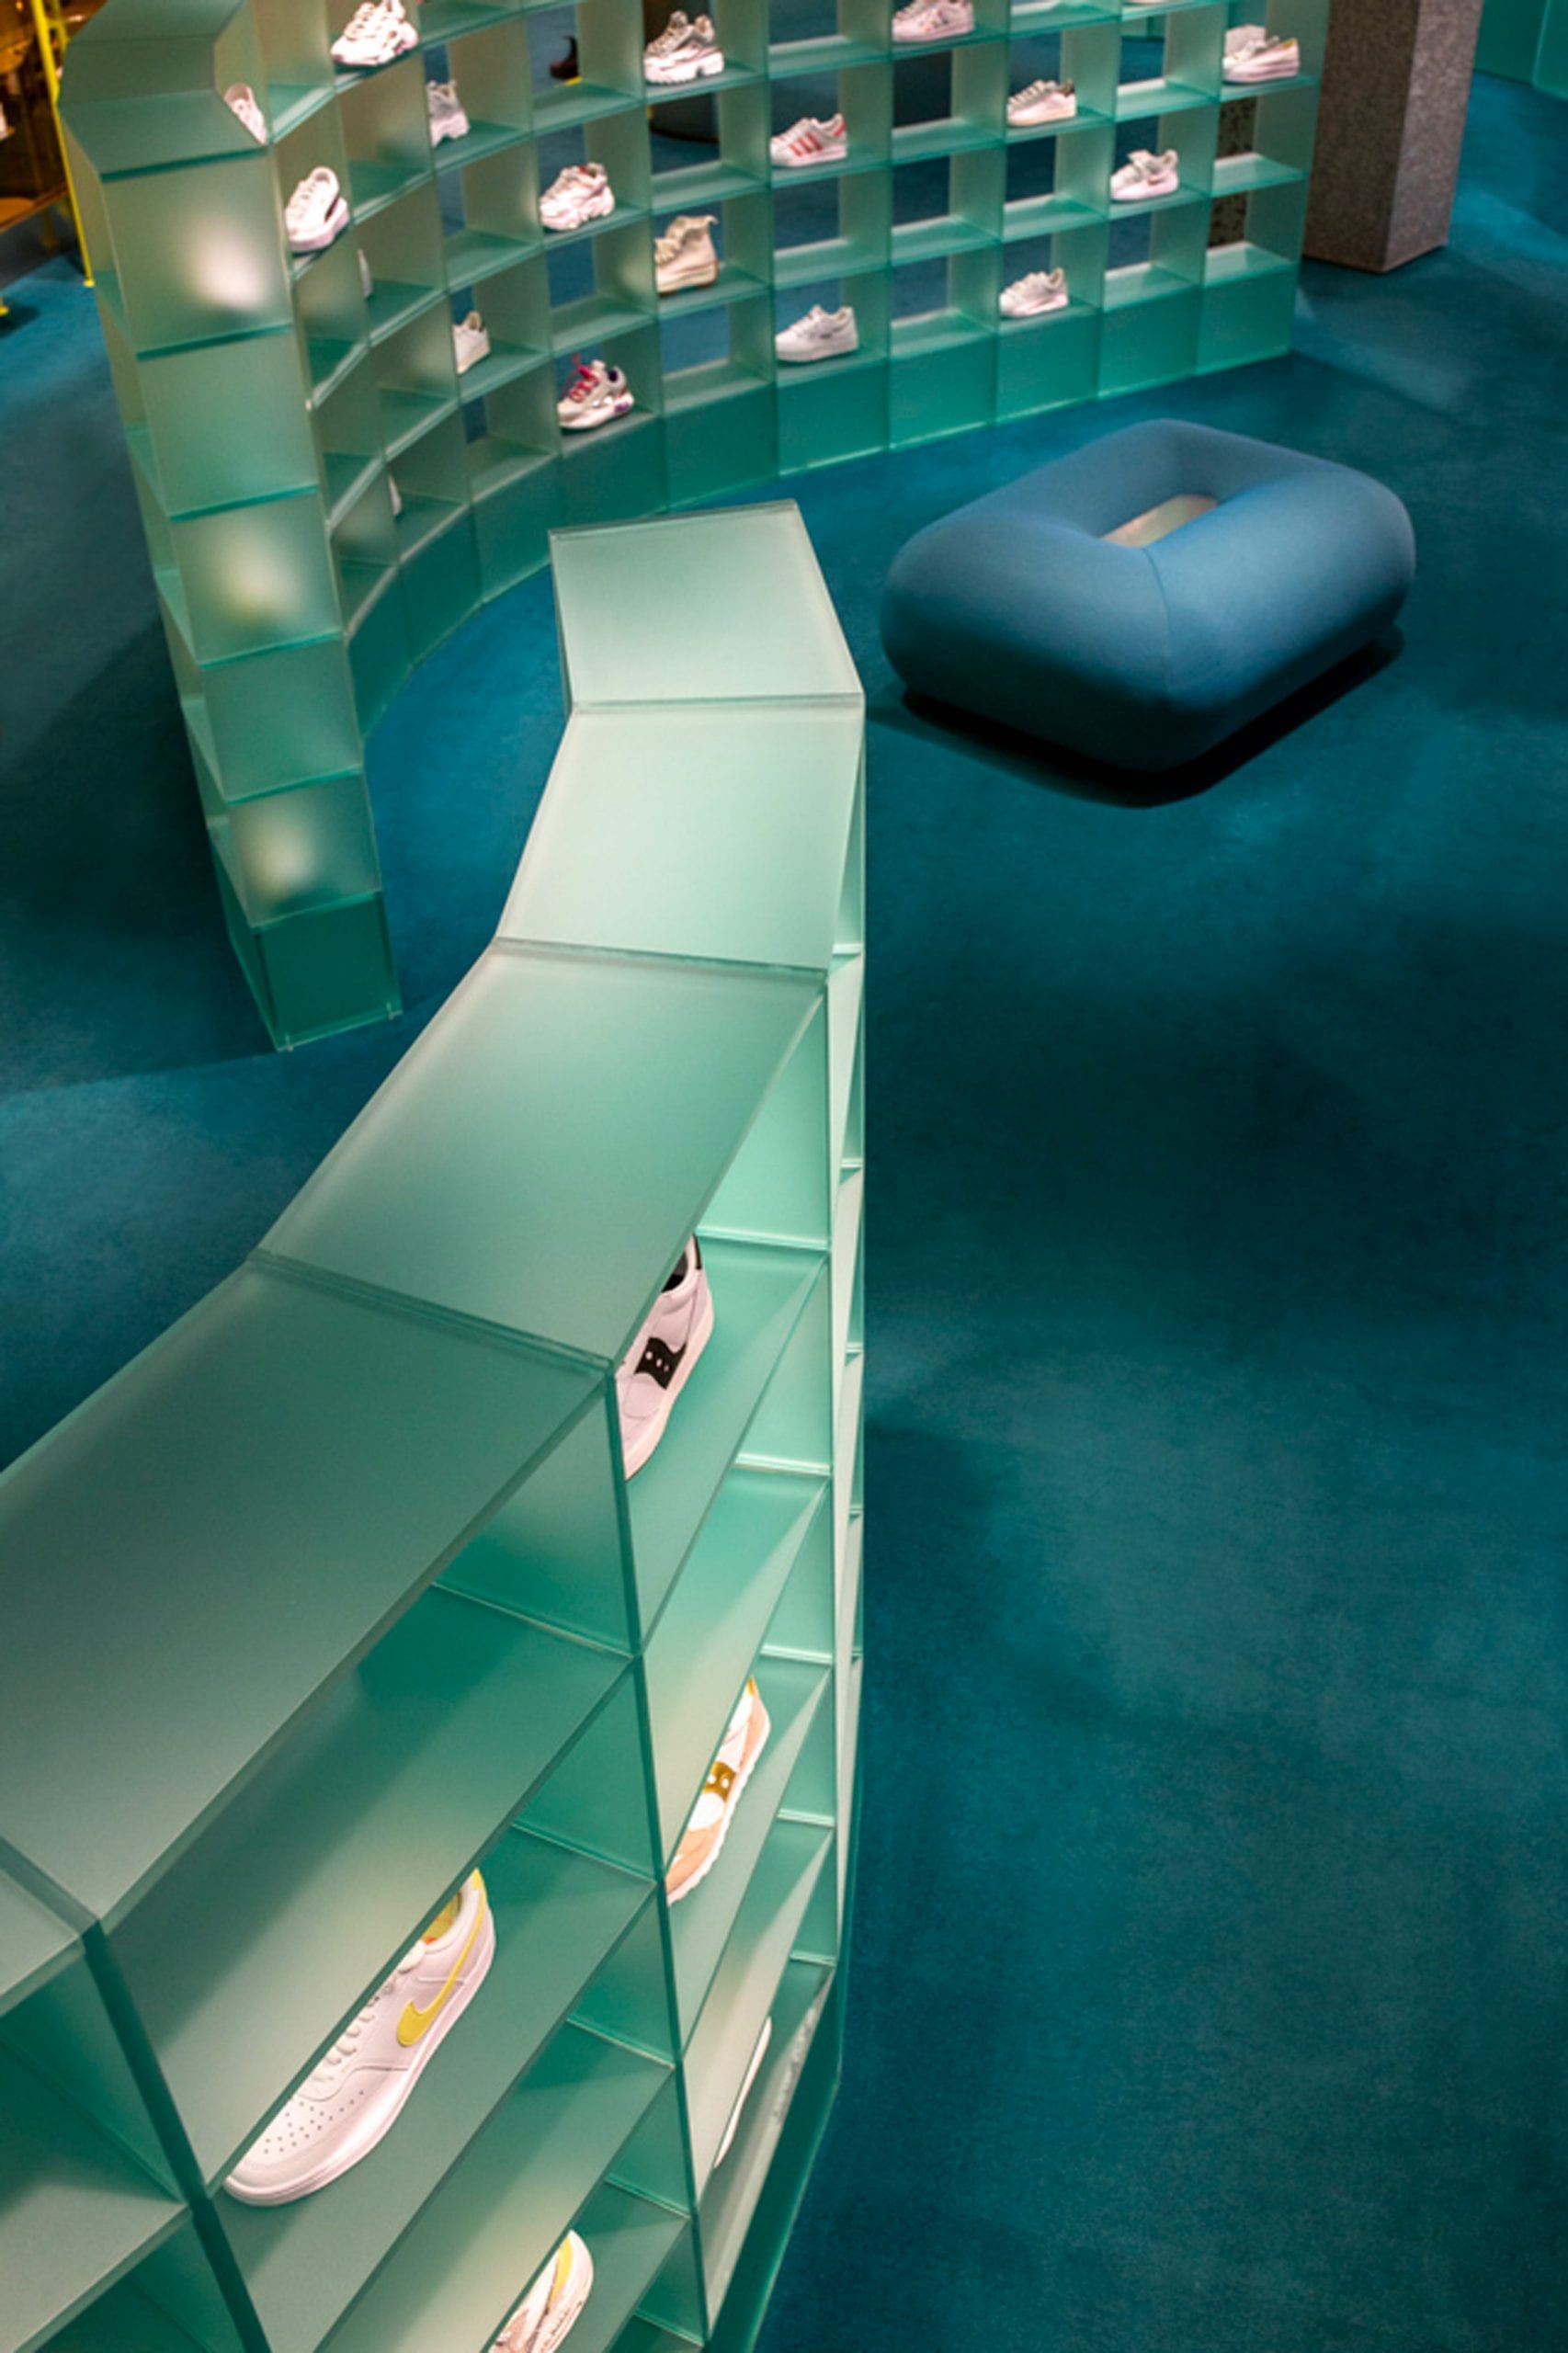 Curved plexiglass shelving displaying trainers on blue carpet in retail interior by Studiopepe